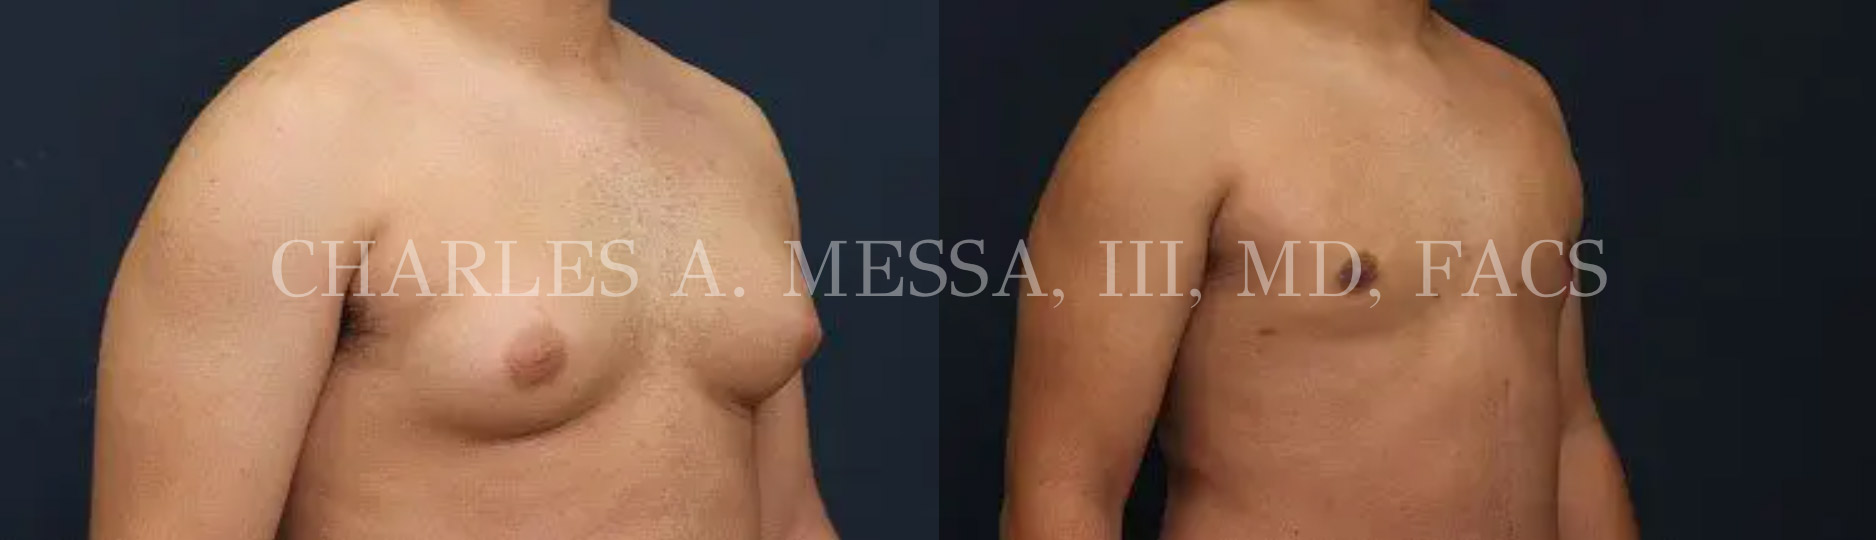 before and after pictures of a gynecomastia surgery patient